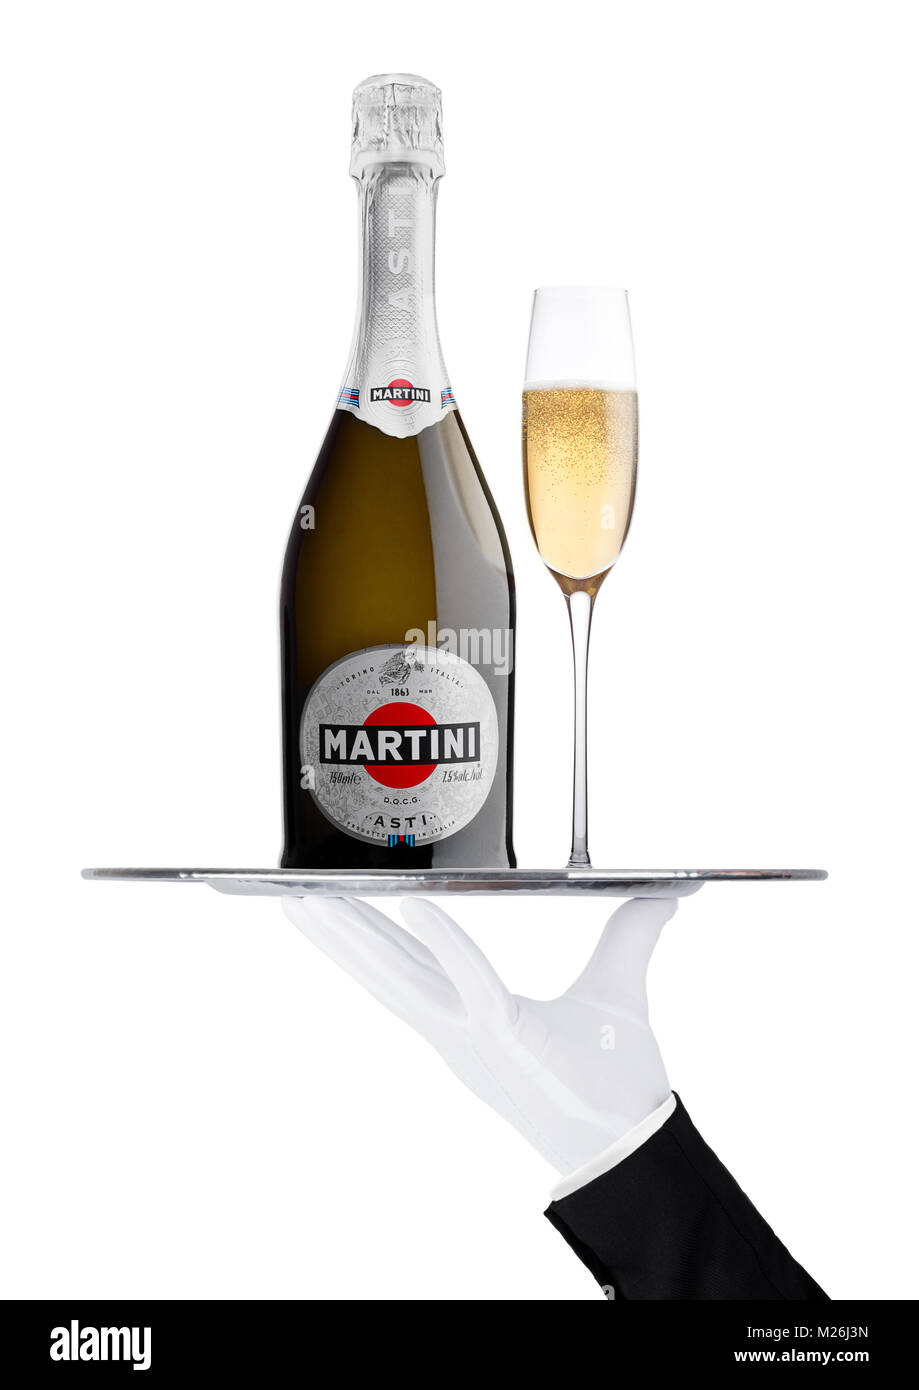 LONDON, UK - November 24, 2017: Hand with glove holds tray with Martini Asti champagne bottle and glass on white background. Produced in Italy Stock Photo